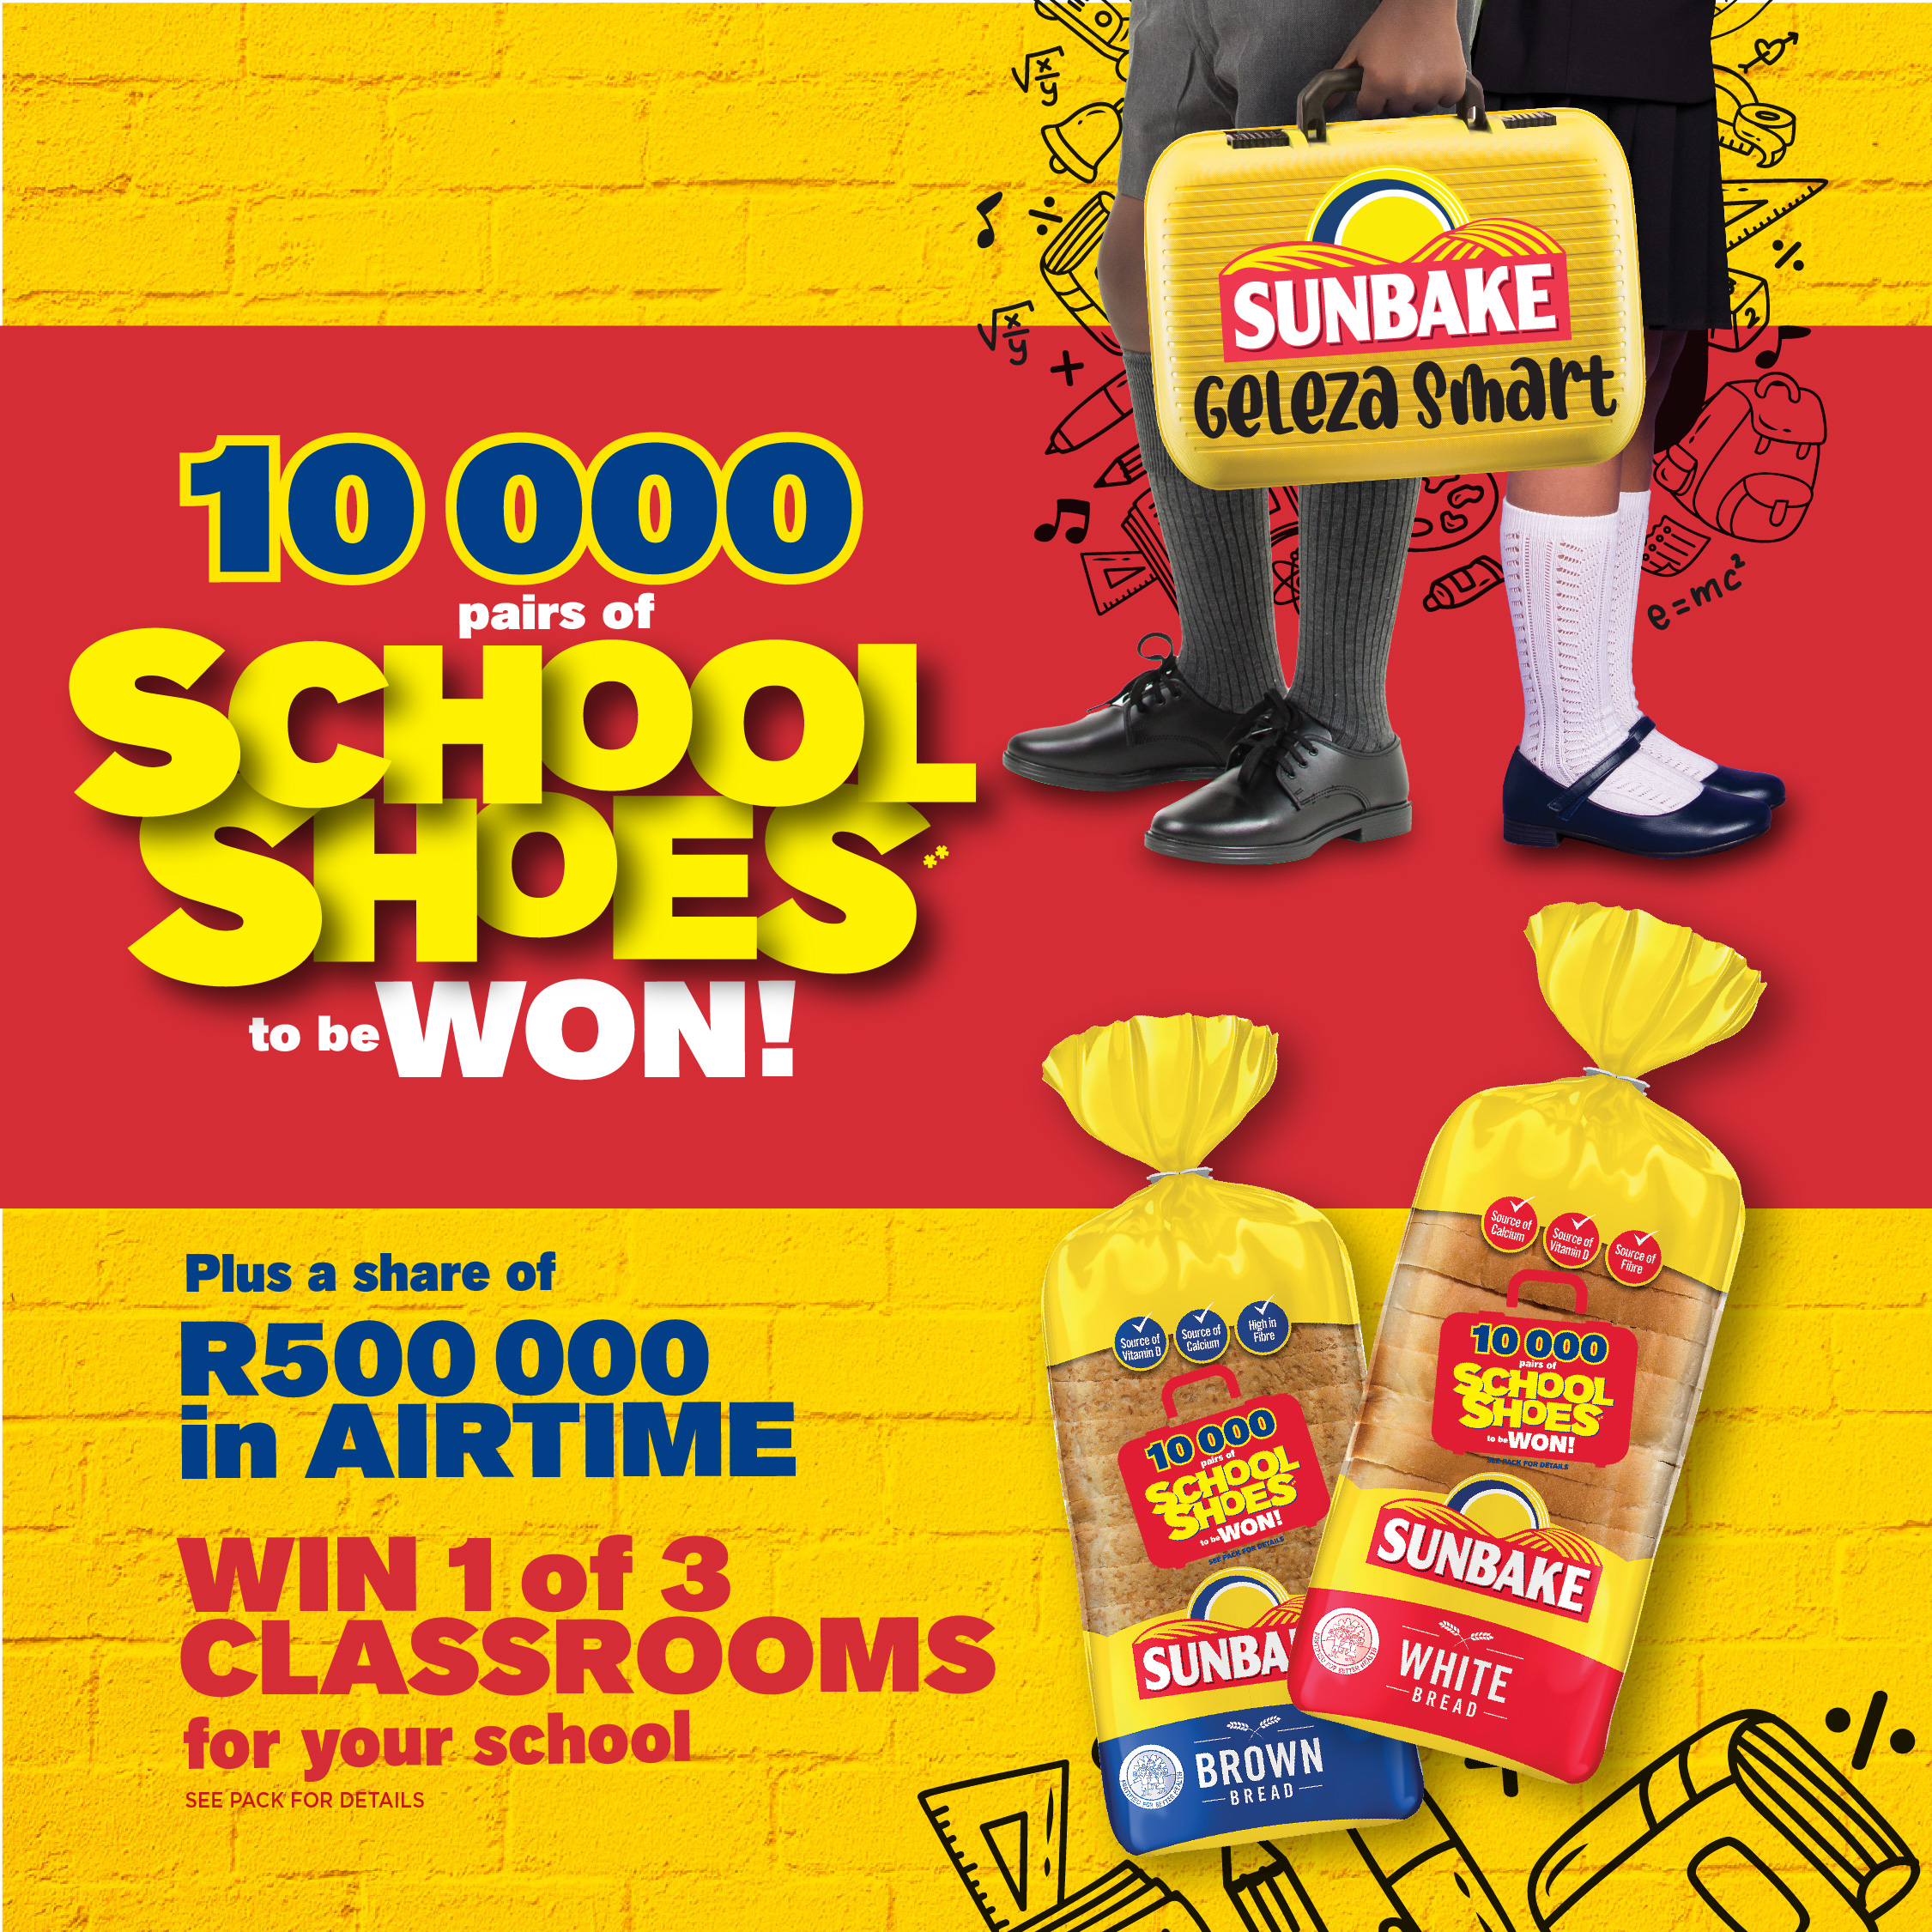 10000 pairs of school shoes to be won!